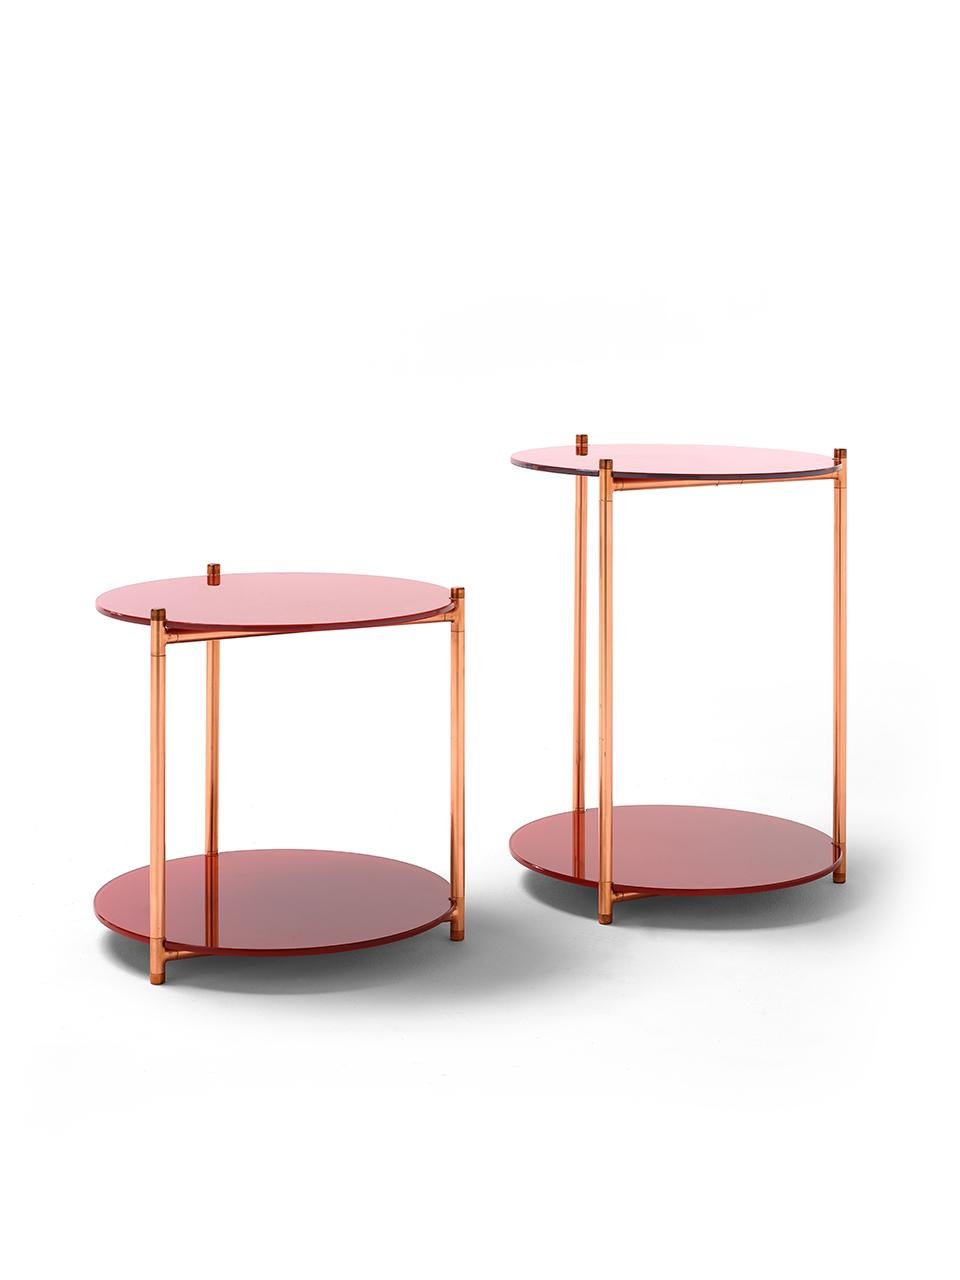 The Long Playing side tables stem from the eponymous étagère and feature the same play of materials: an essential but rich copper structure supporting two circular shelves made of back-painted glass. The rich warm metal of the base plays beautifully